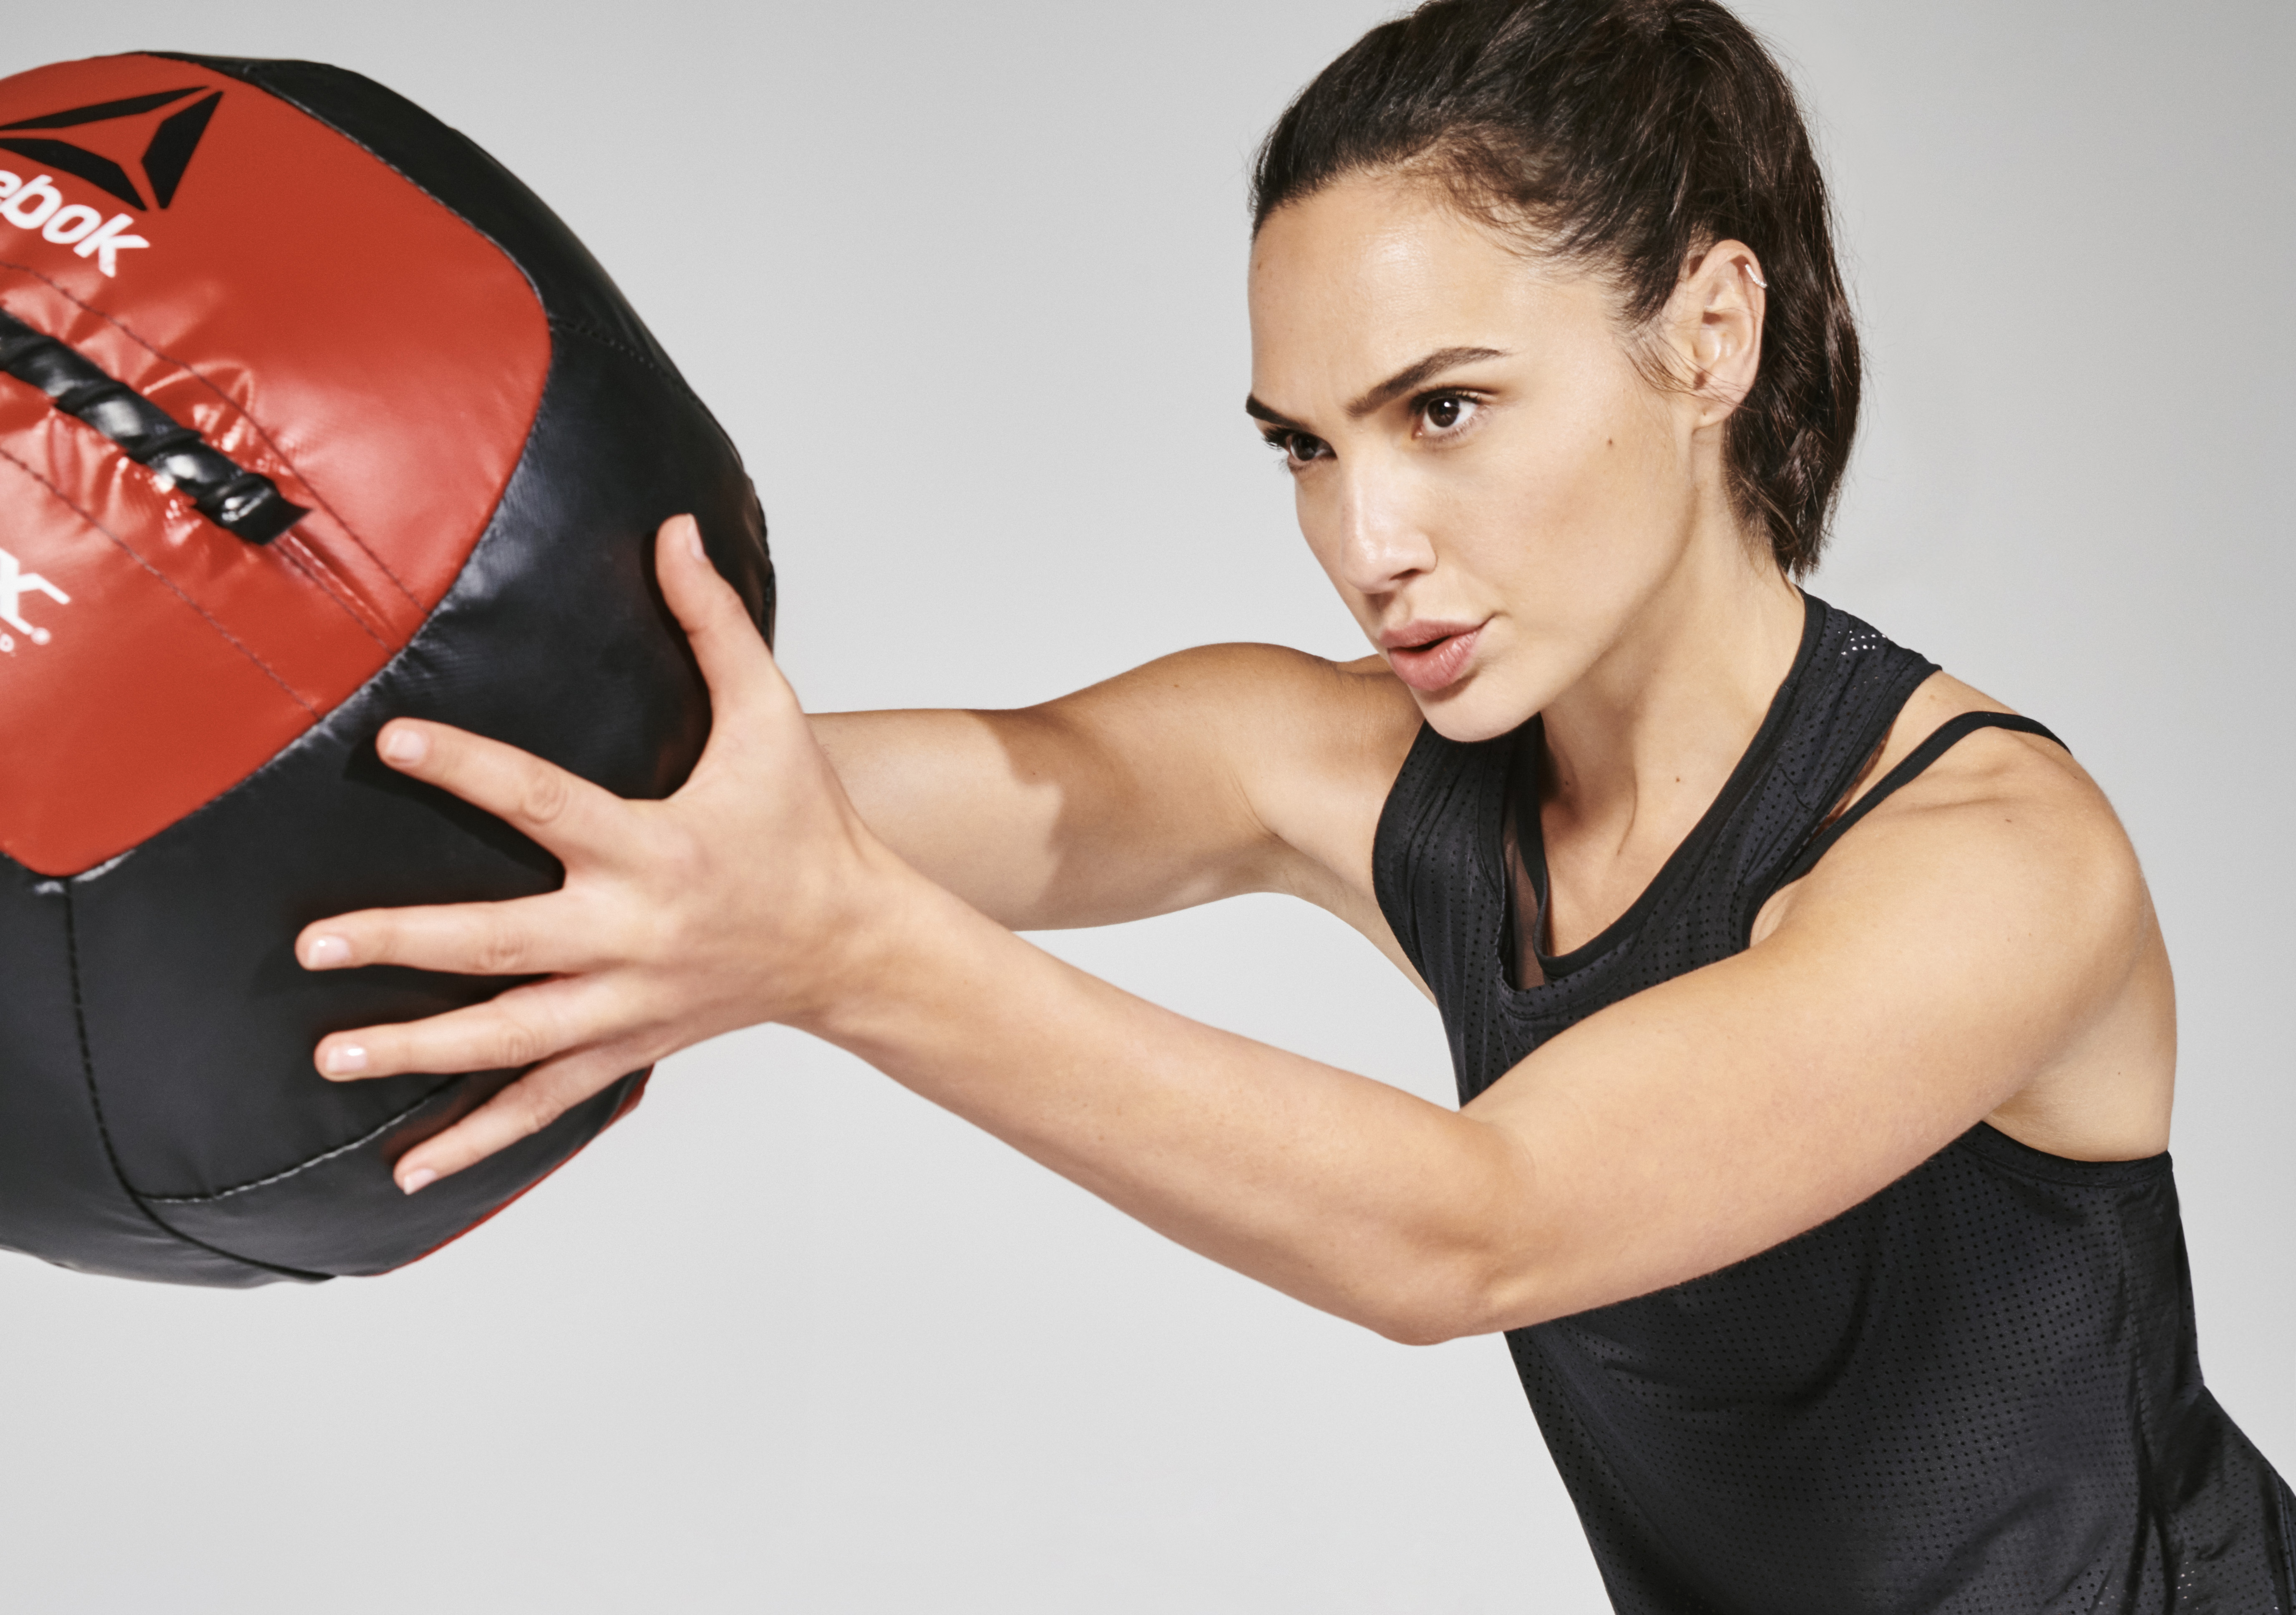 Gal Gadot playing with a ball for reasons.....